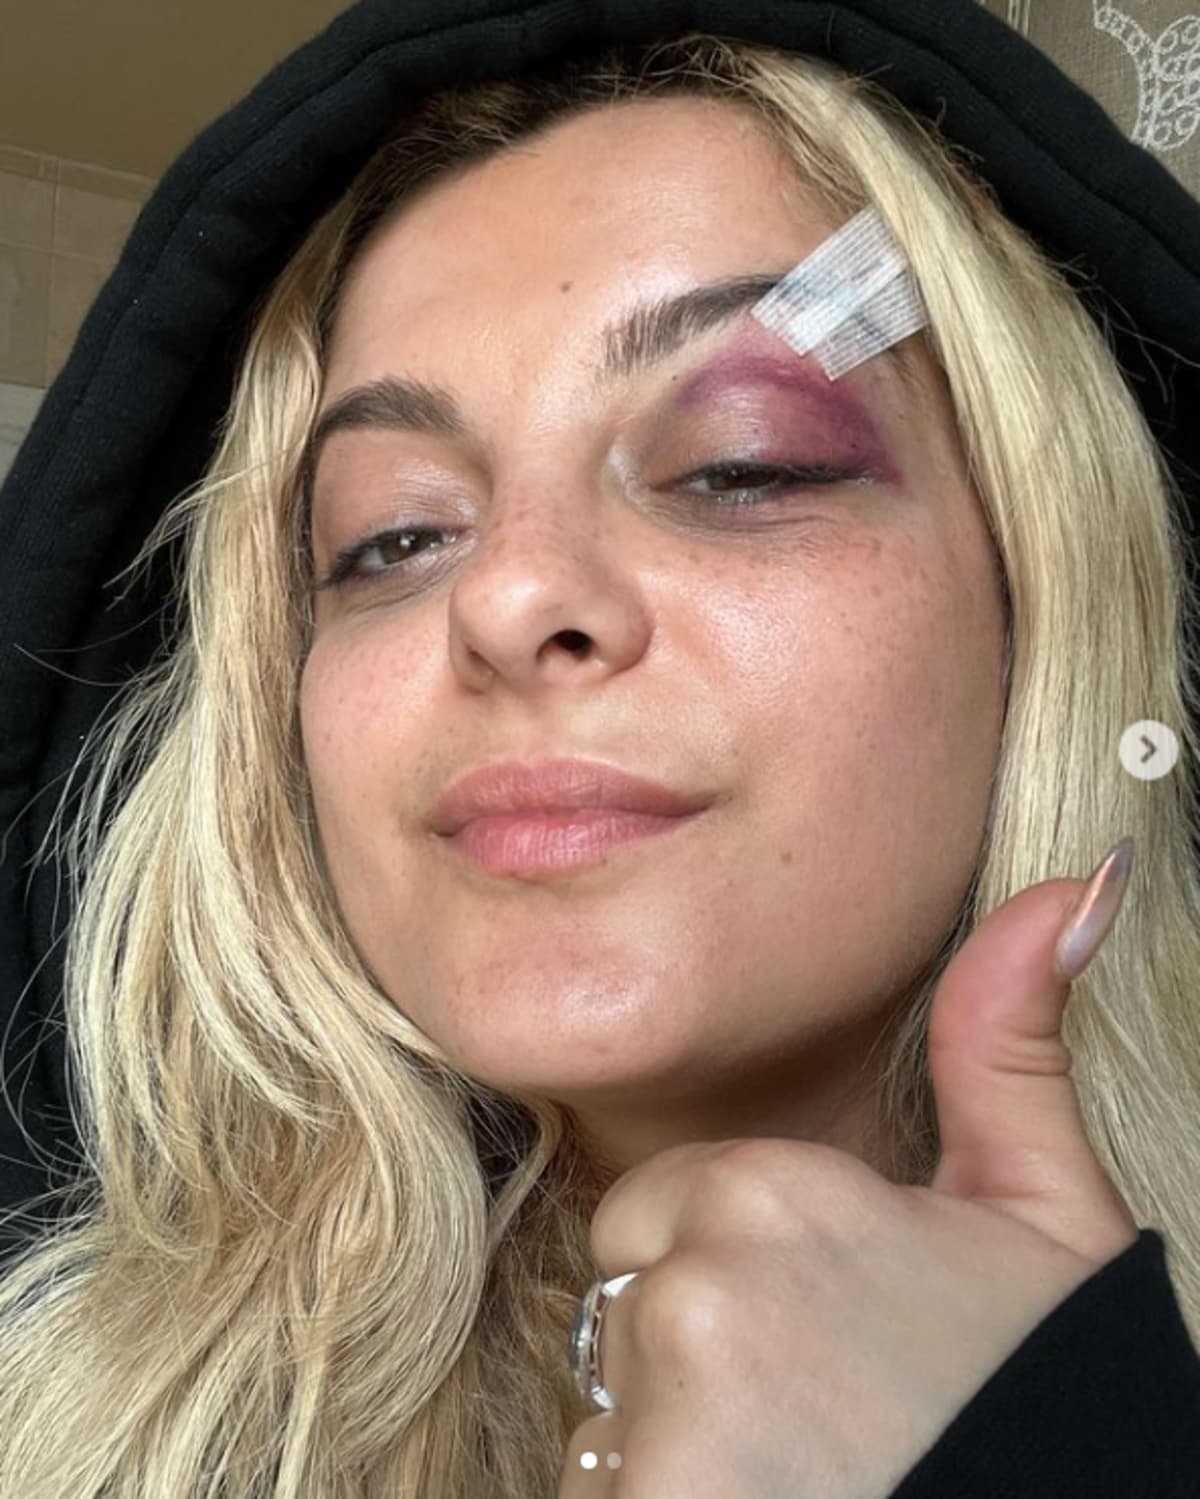 <p>An audience member hurled a cell phone at Bebe Rexha as she was performing at a recent tour stop in New York City. Bebe was seen on camera dropping to her knees and clutching her head during the incident. After the show ended, she was taken to the hospital and had three stitches done.</p>